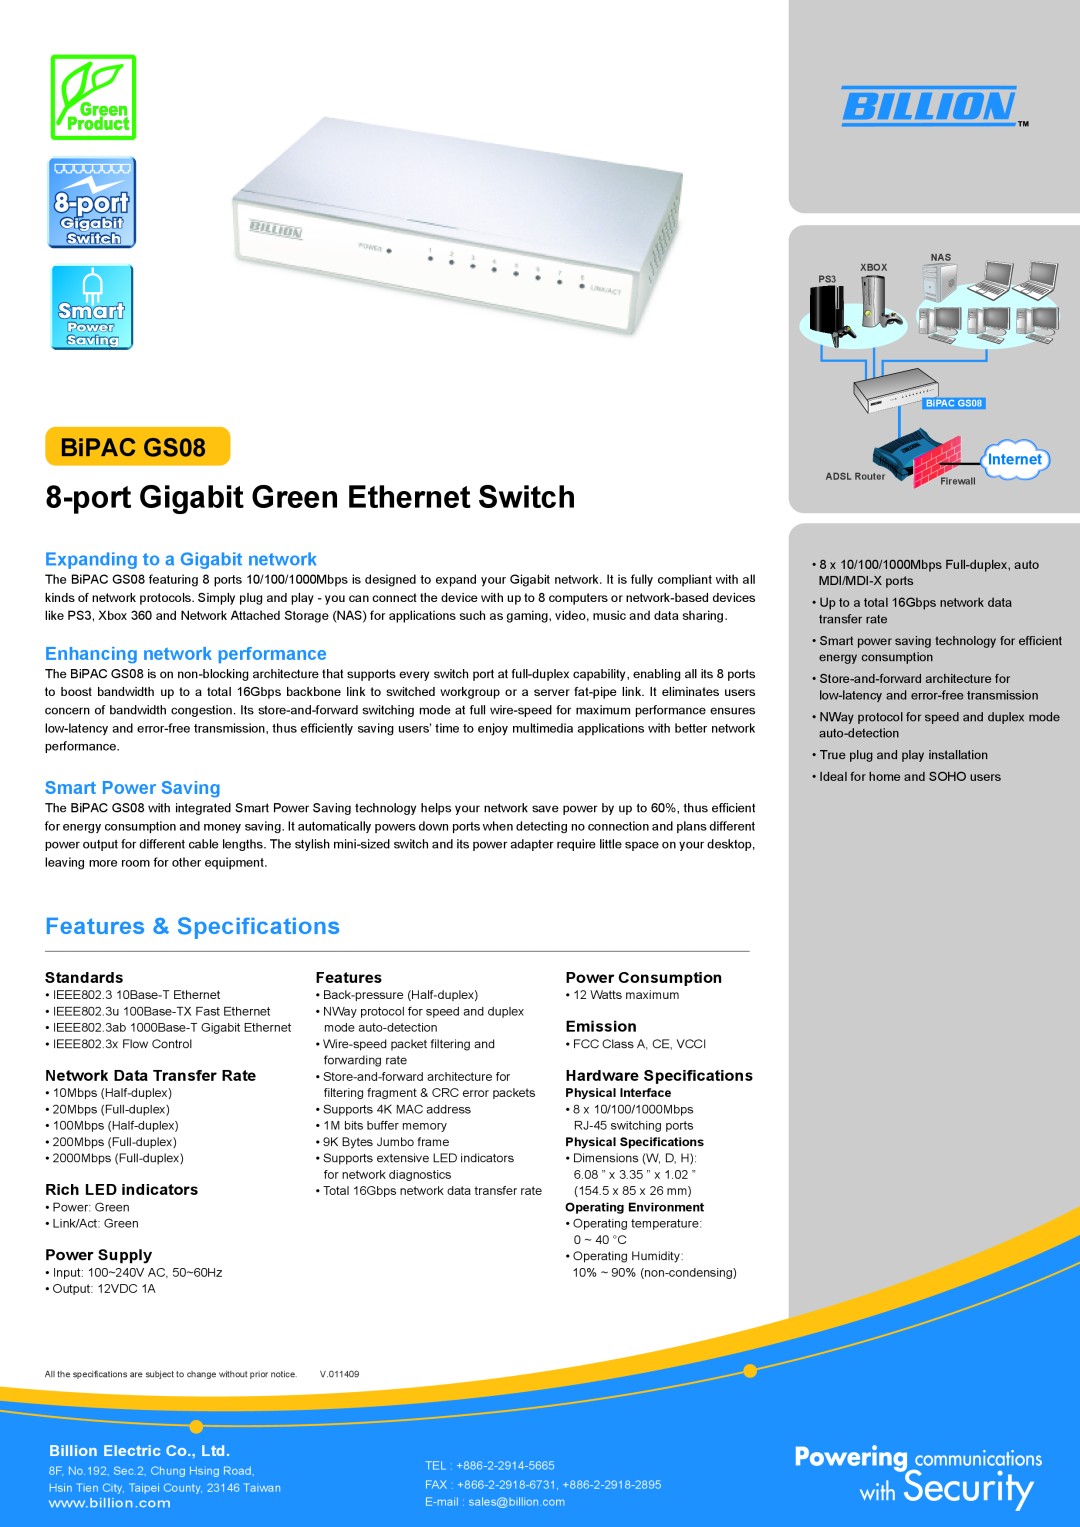 Billion Electric Company specifications port Gigabit Green Ethernet Switch, BiPAC GS08, Features & Specifications 